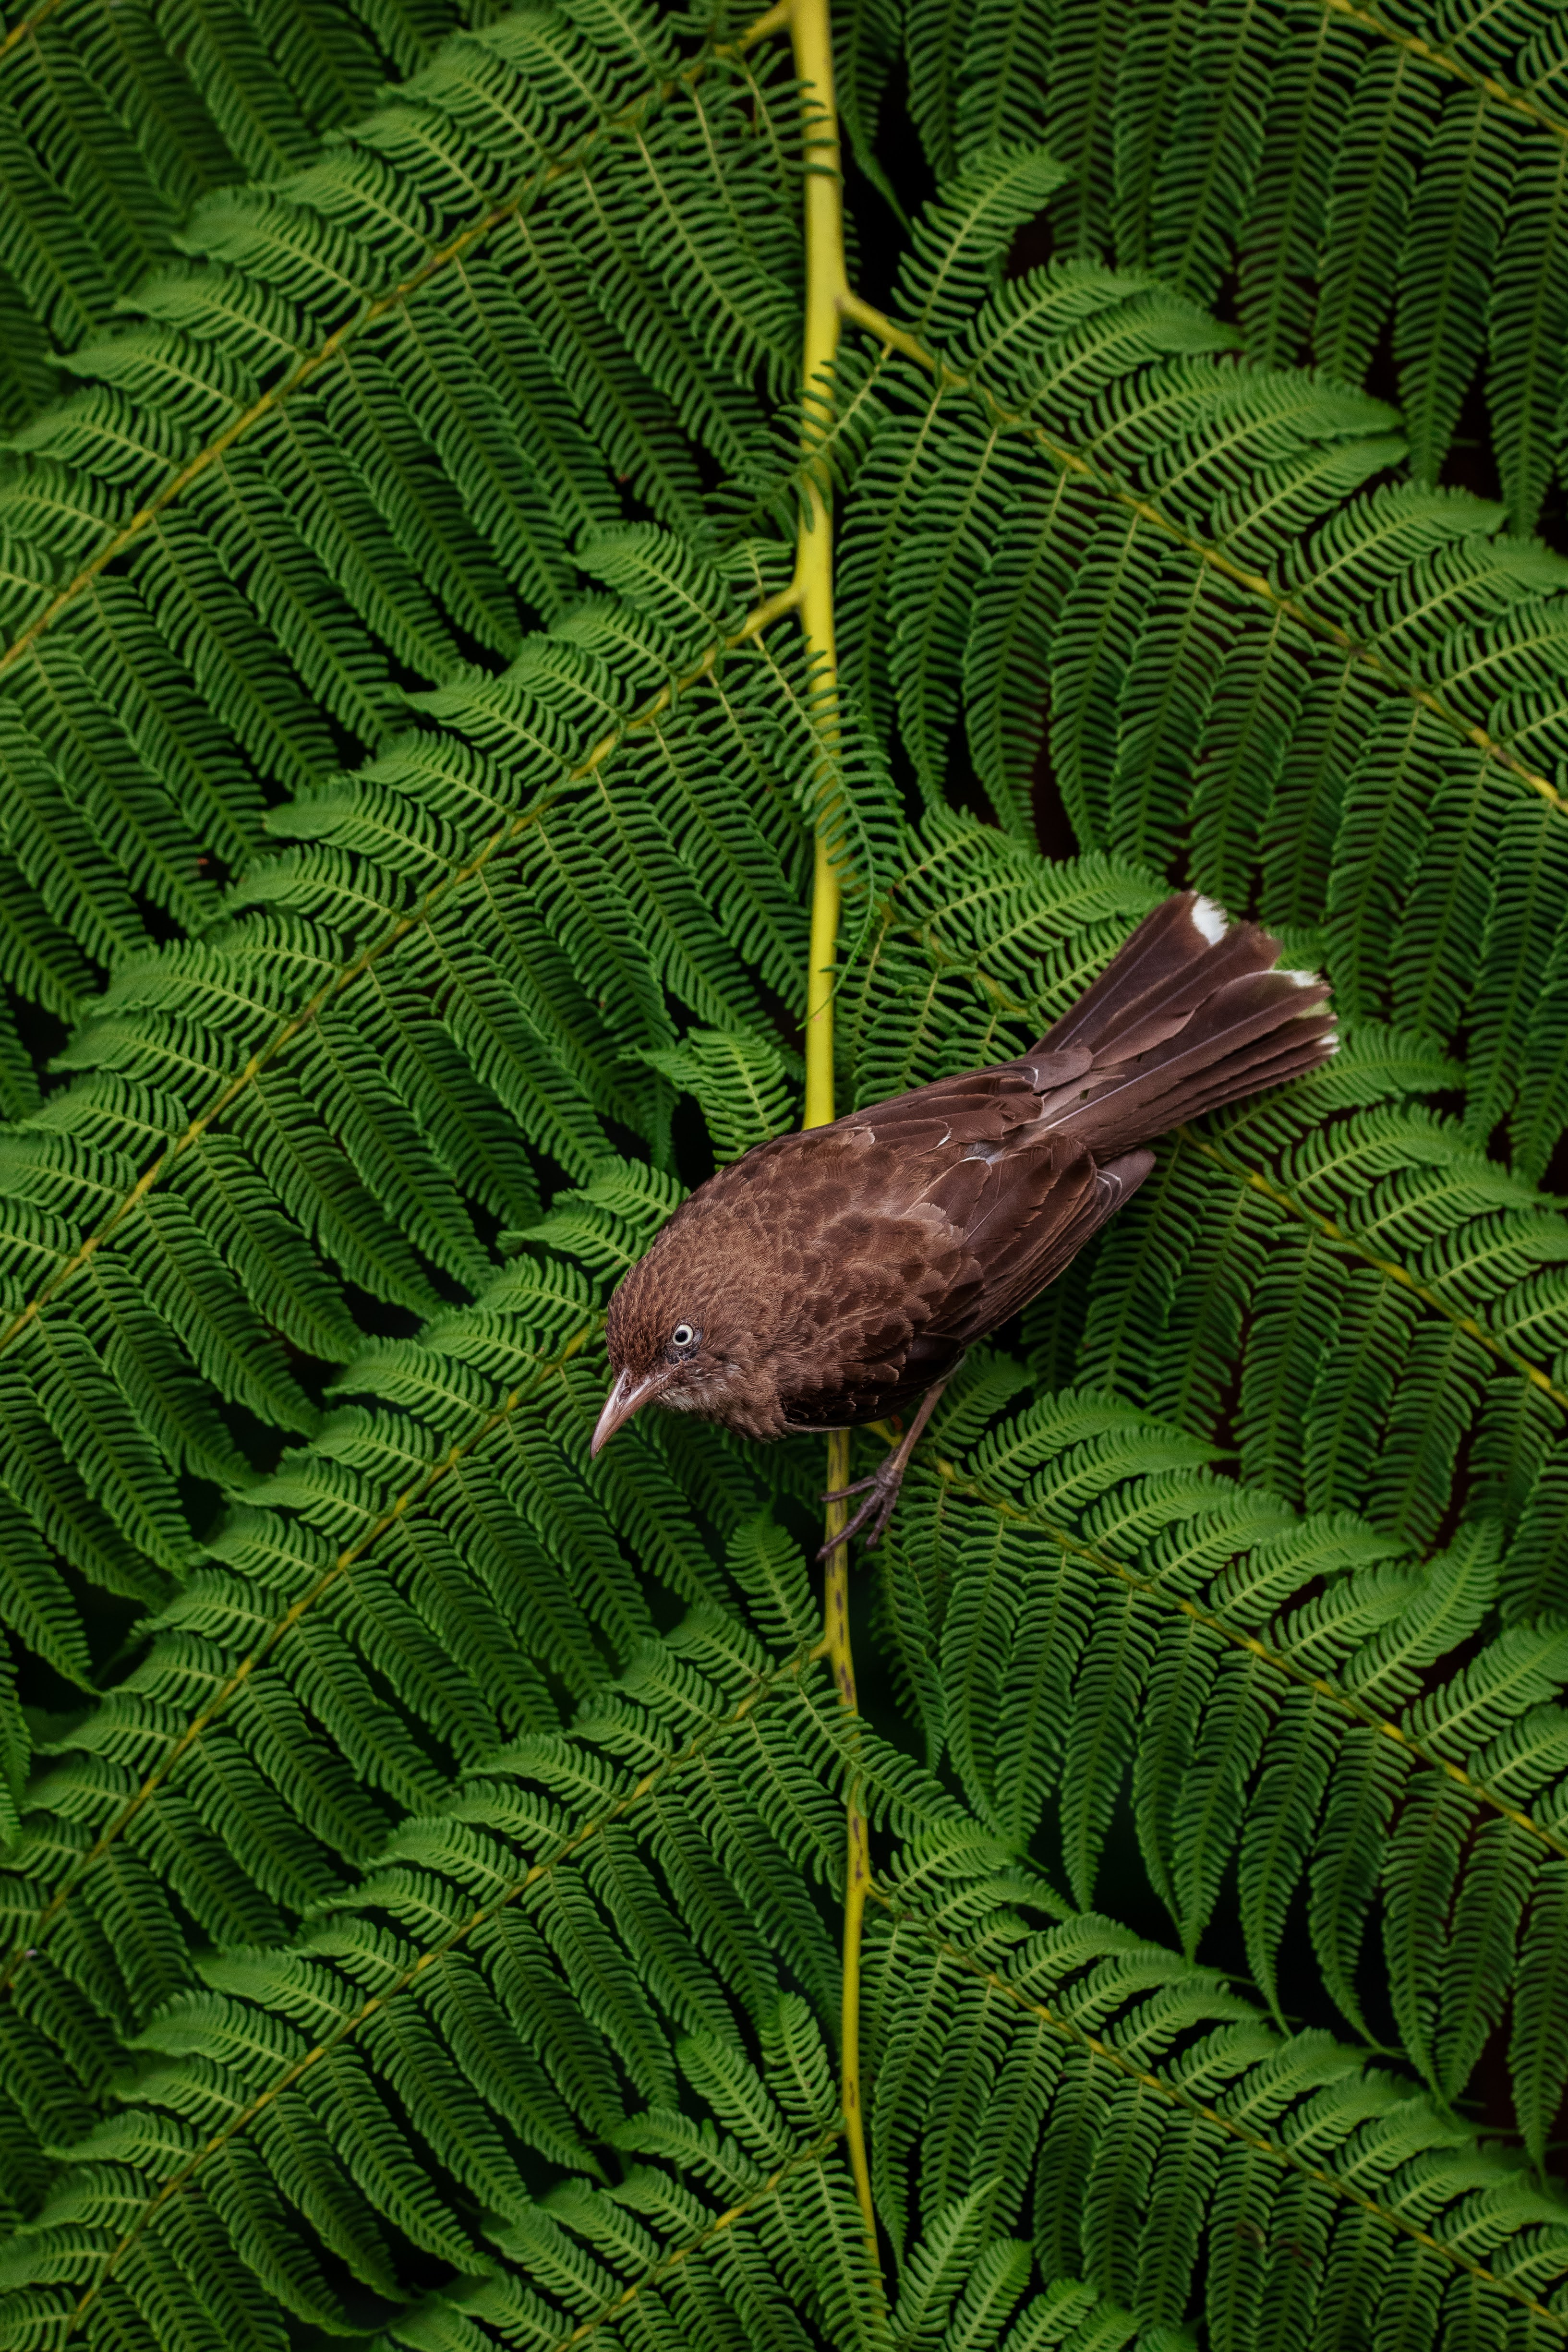 A small brown bird on a green leaf